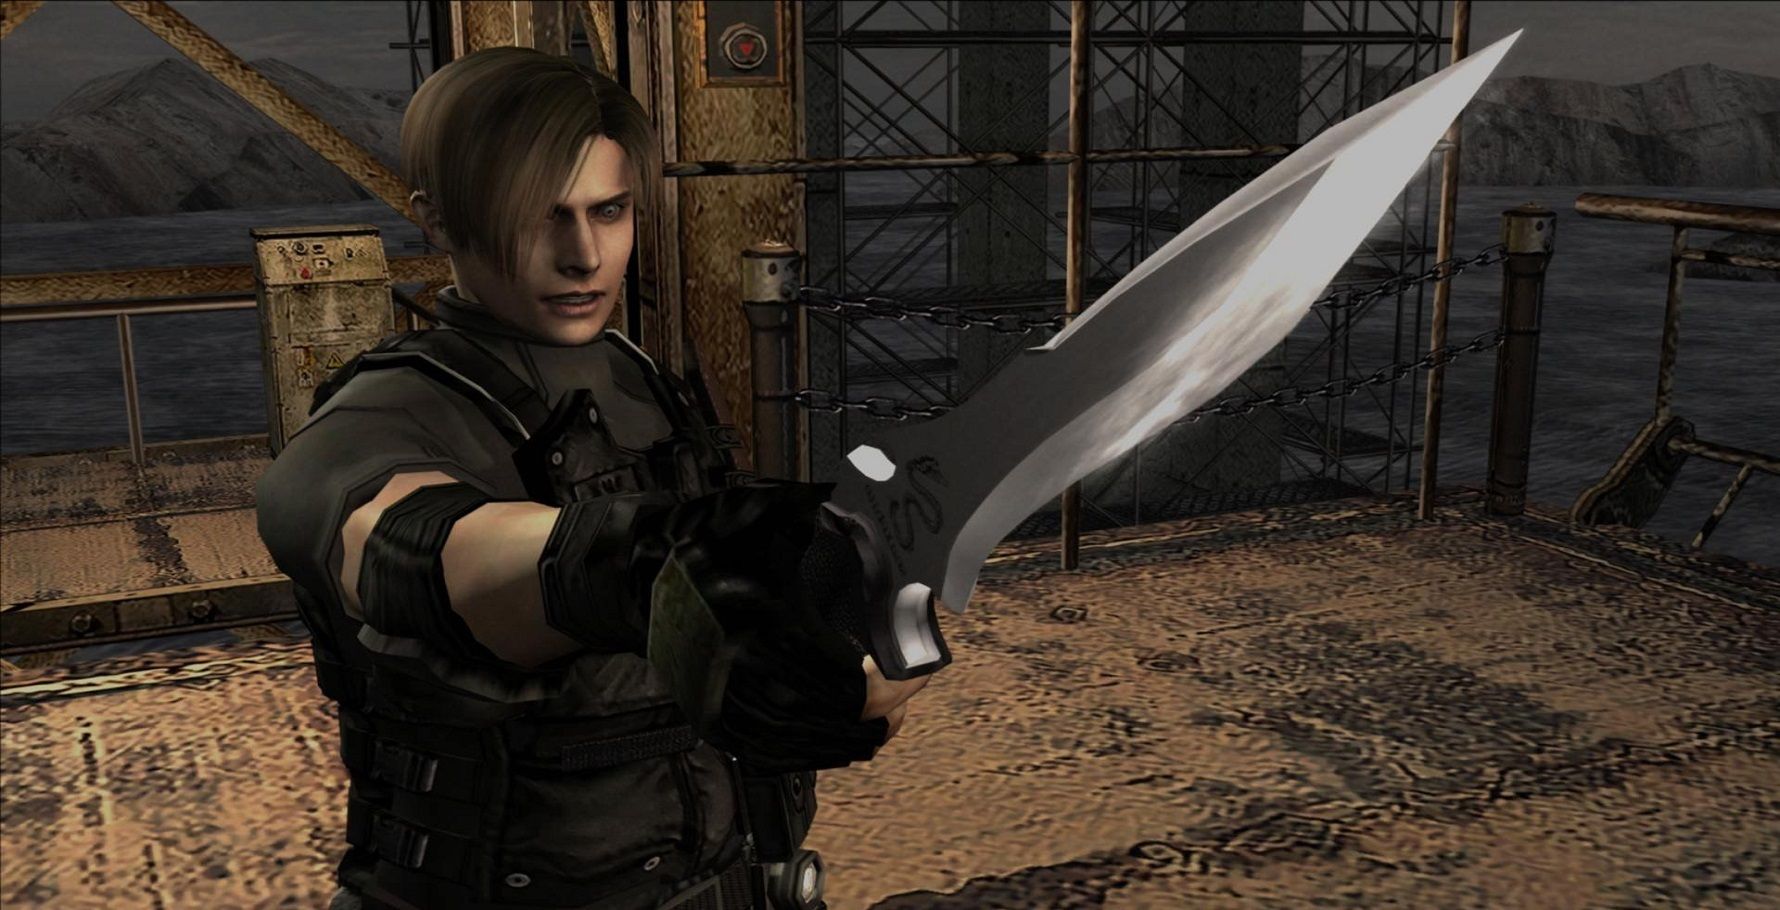 Join Leon, Ashley and Krauser for a new Resident Evil 4 trailer